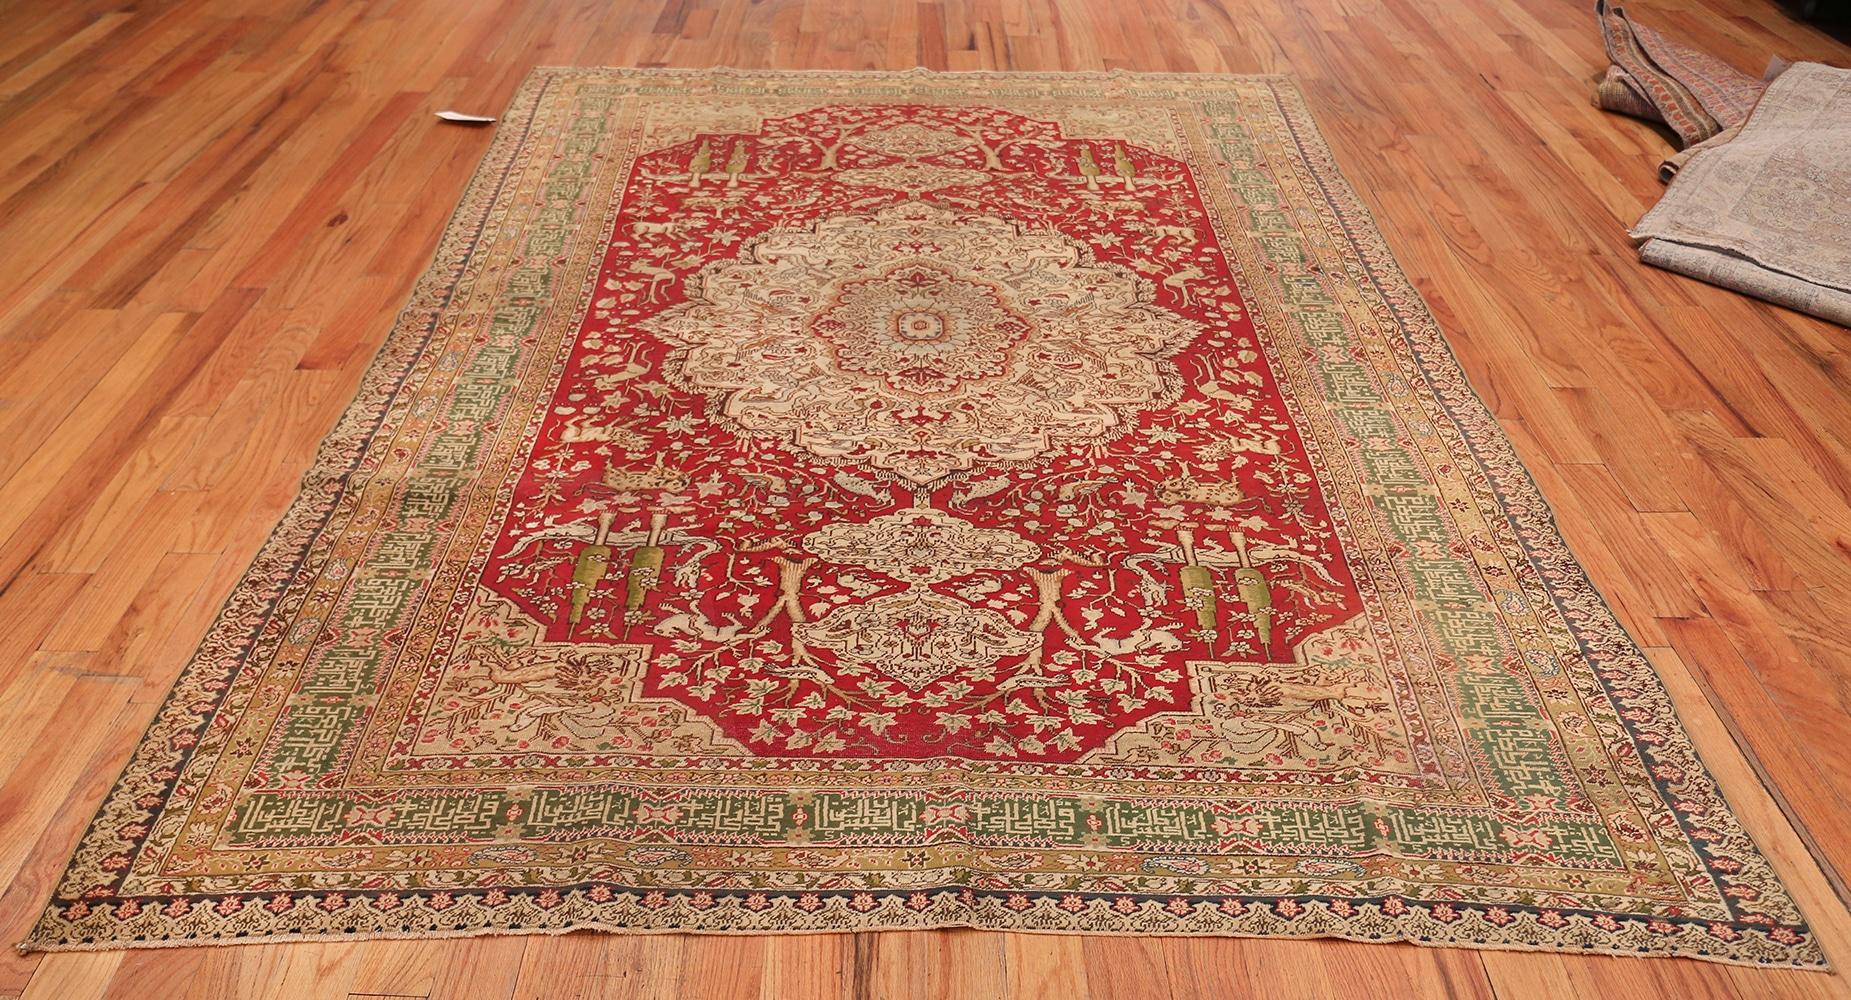 Antique Turkish Keysari Rug. Size: 6 ft 2 in x 8 ft 8 in (1.88 m x 2.64 m) In Excellent Condition For Sale In New York, NY